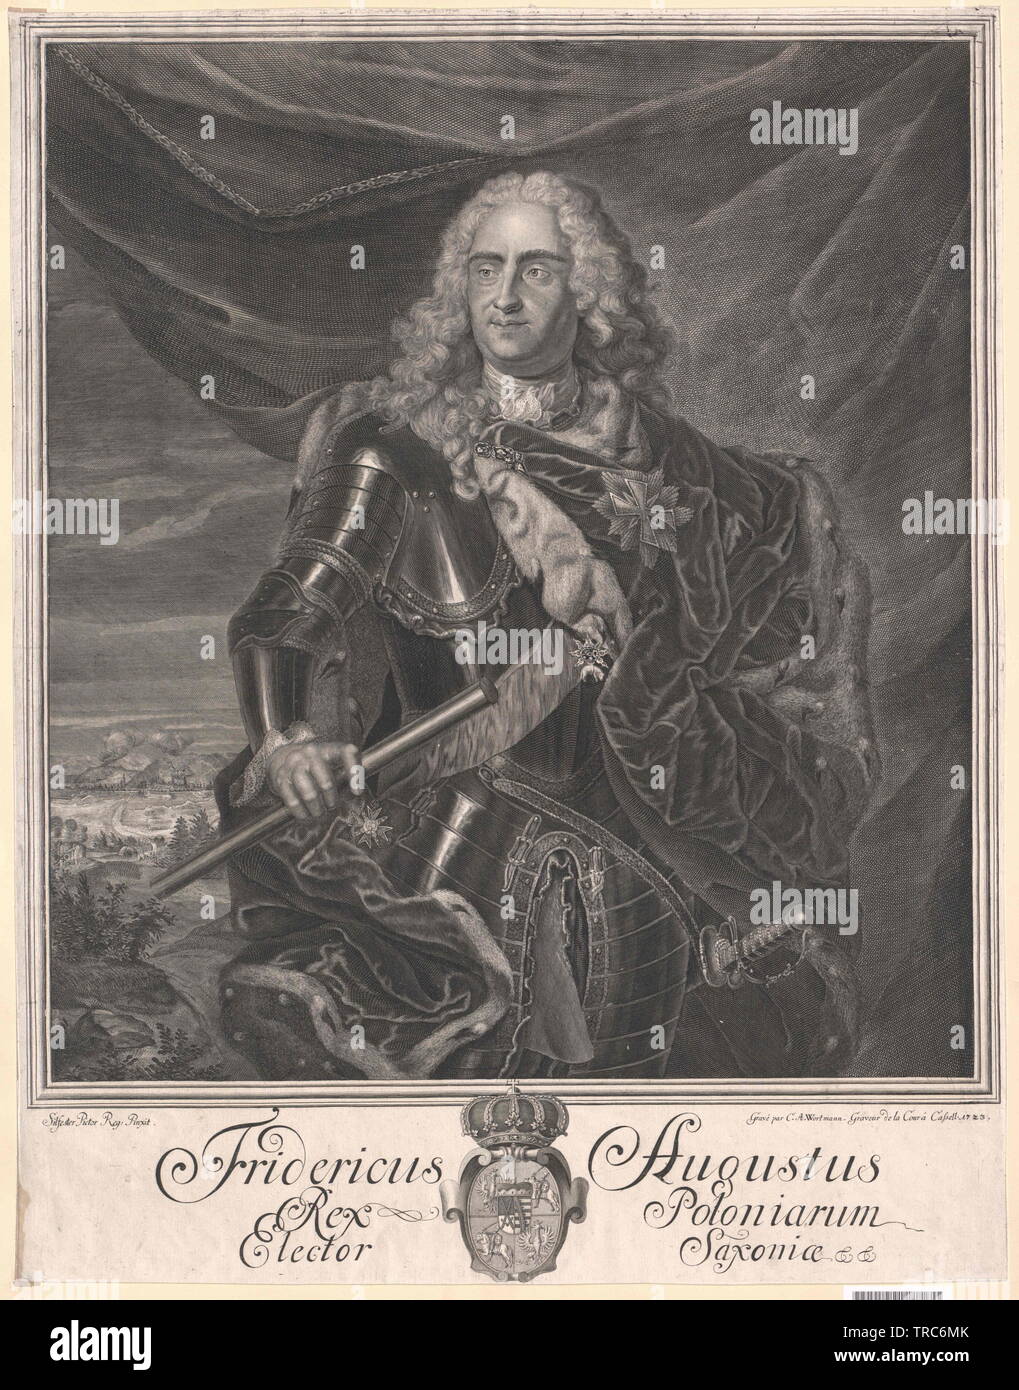 Frederick August I, Elector of Saxony, Additional-Rights-Clearance-Info-Not-Available Stock Photo